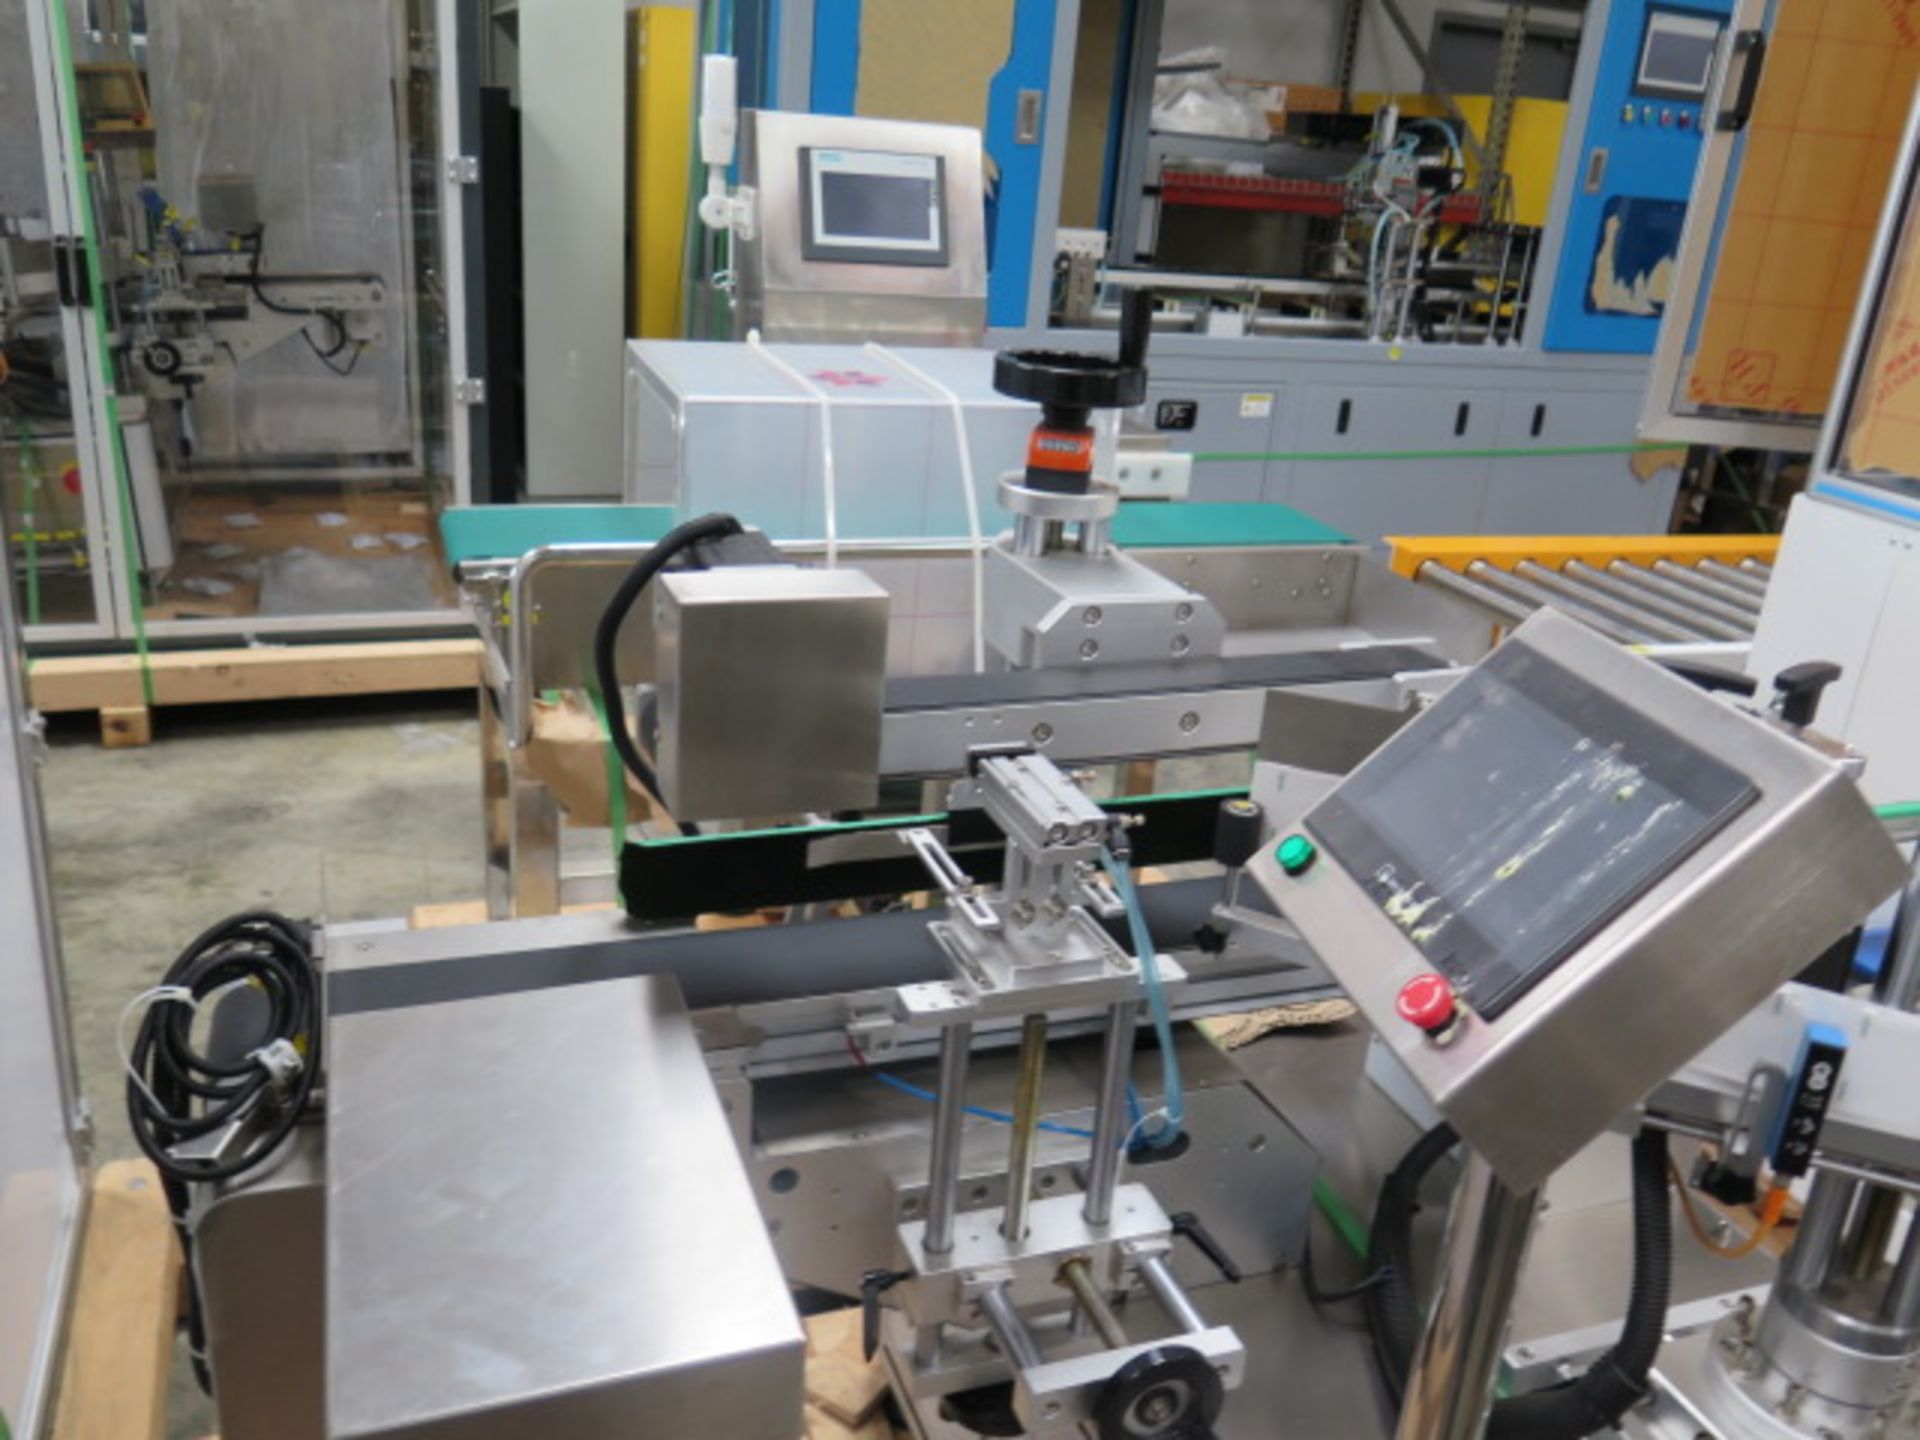 2022(NEW) Rongyu RY-ZH-80 Packaging Machine s/n220302 w/Siemens Smart Line Touch Controls,SOLD AS IS - Image 23 of 48